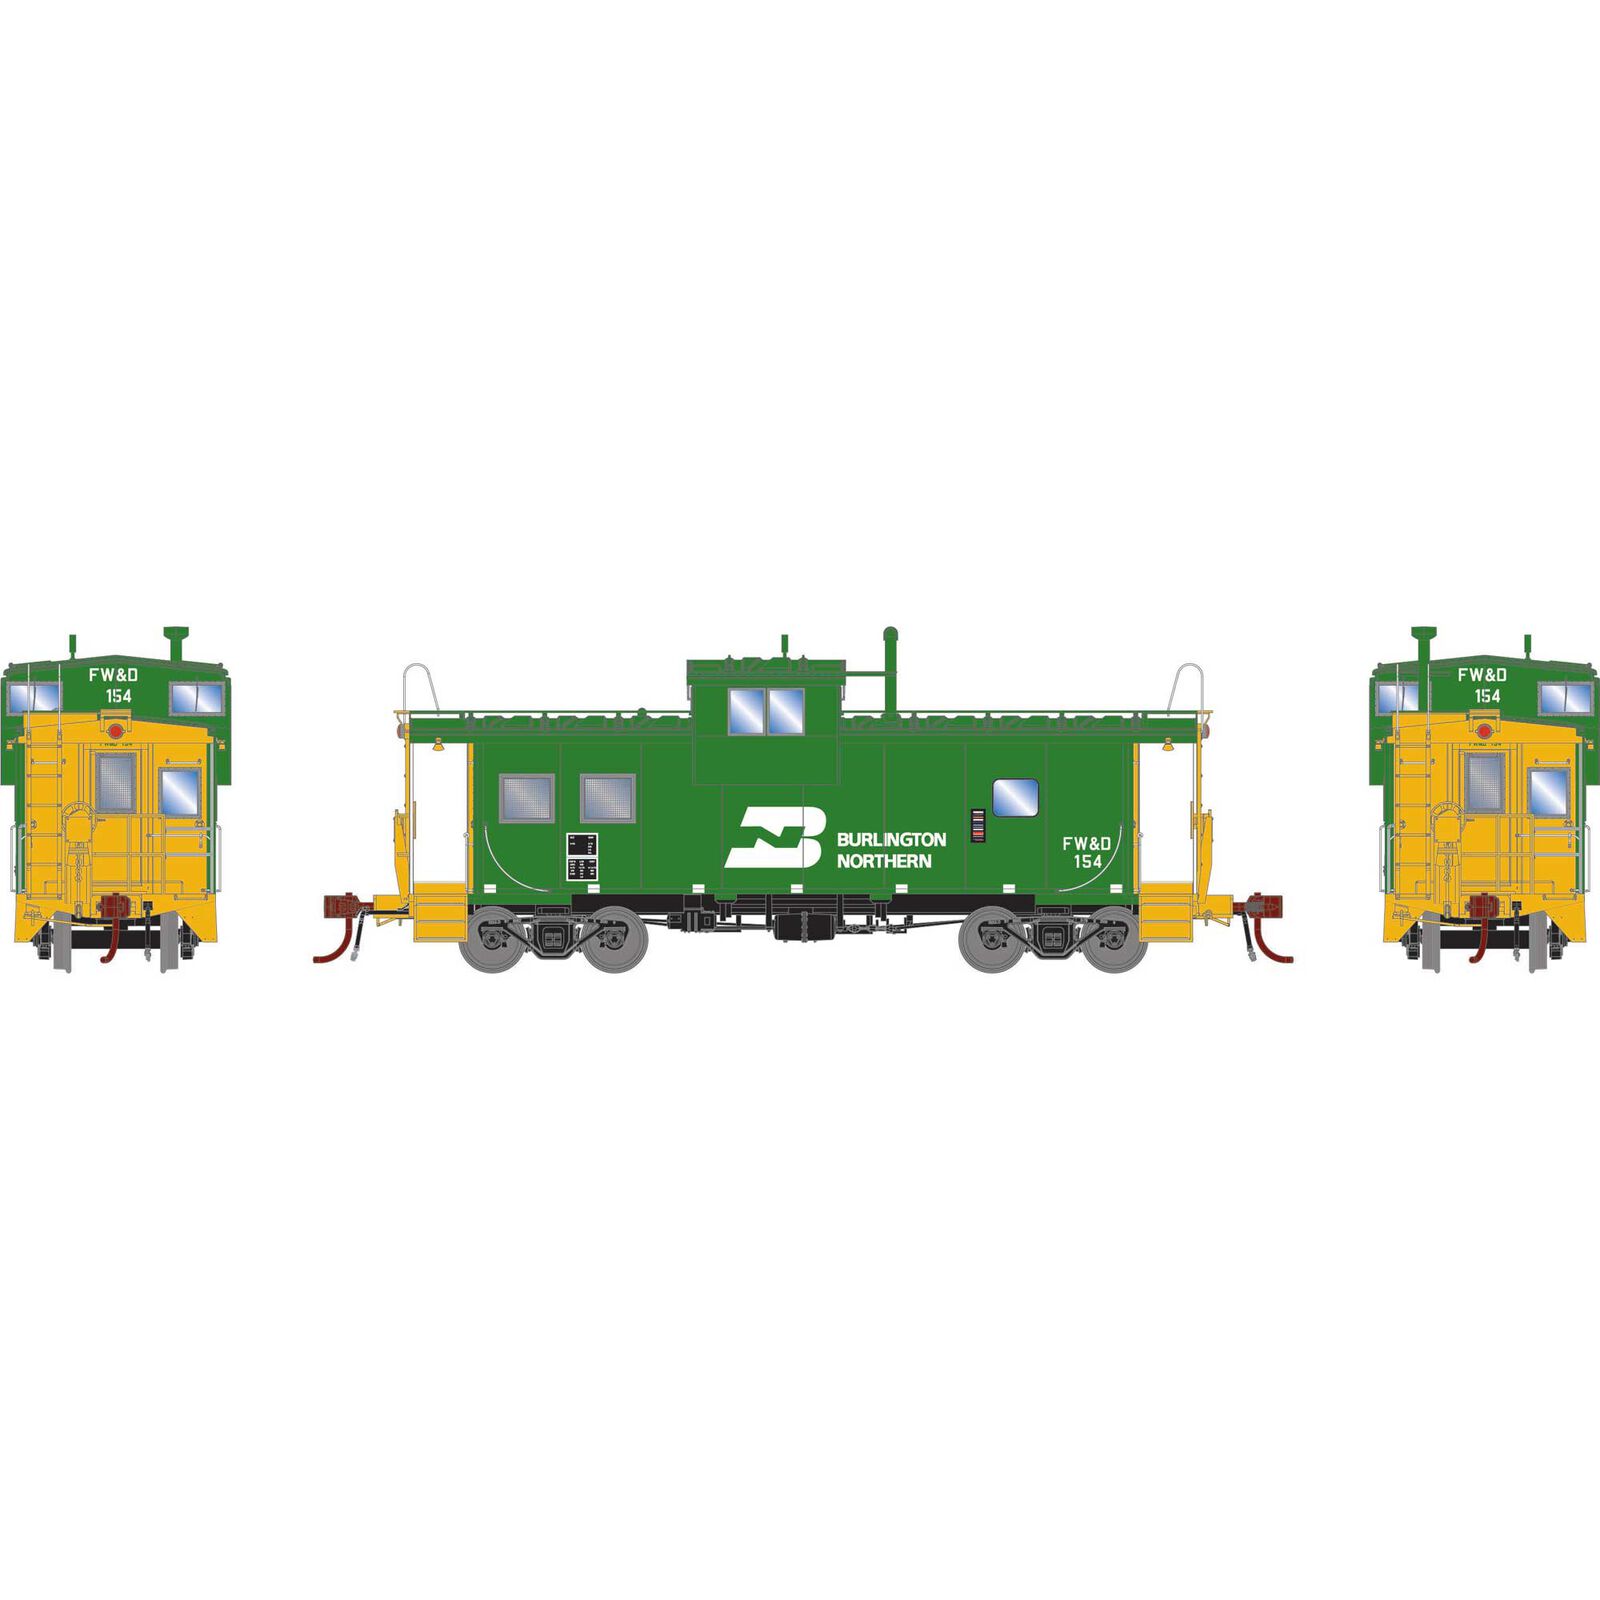 HO GEN ICC Caboose with Lights & Sound, FWD #154